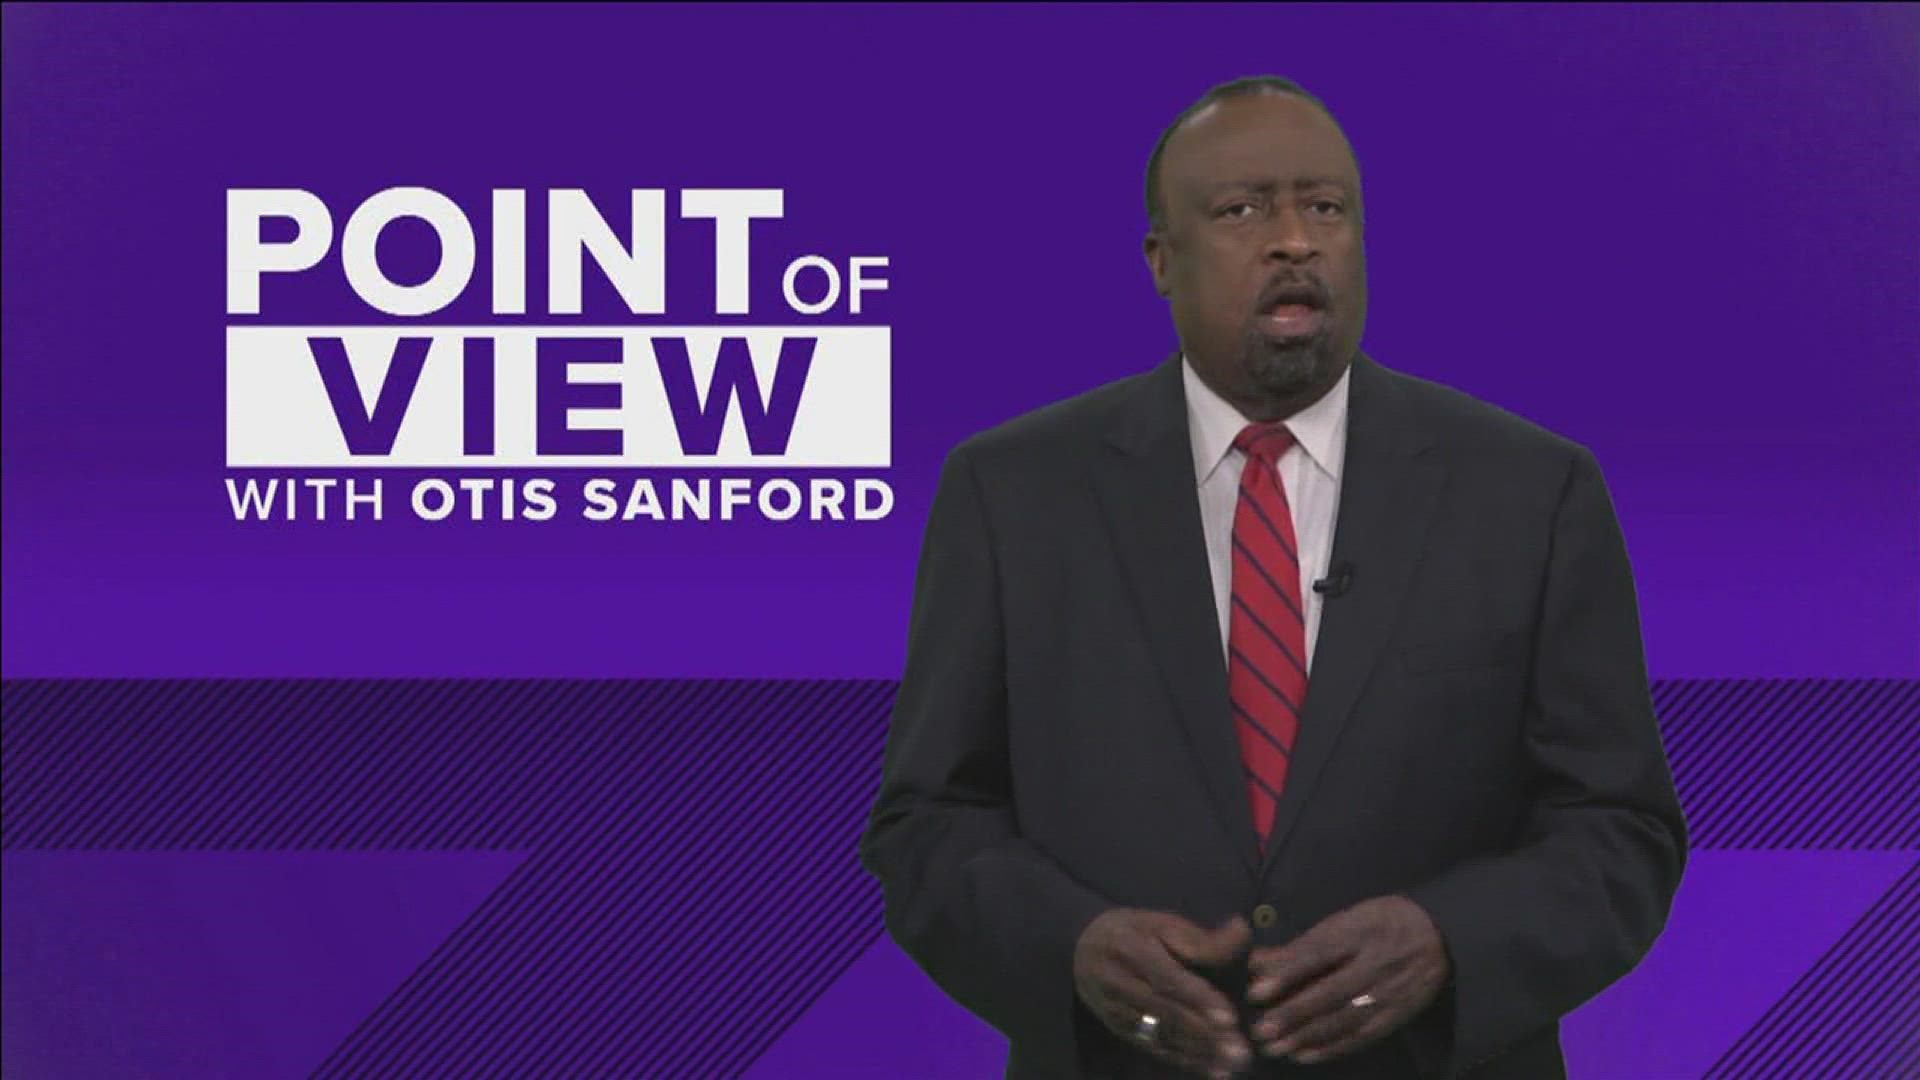 Otis Sanford shares his point of view on the latest developments surrounding Oak Court Mall.